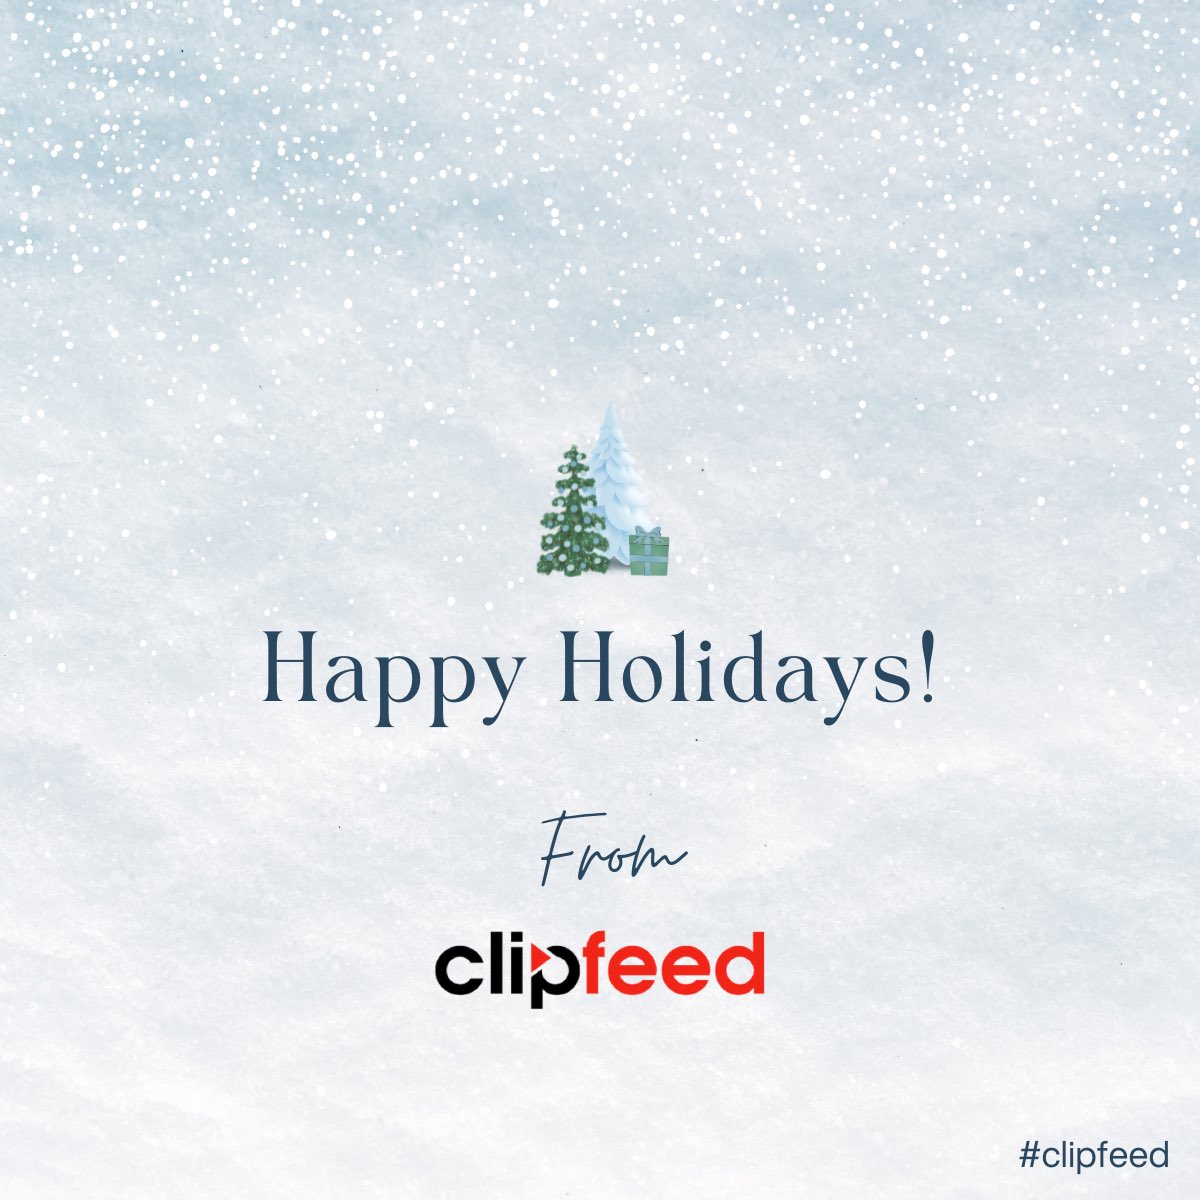 Reflecting on the incredible journey of clipfeed as we near the end of this remarkable year. With steadfast professionalism, we've consistently provided exceptional platforms and services, serving our loyal clients while welcoming new ones.

#esportsplatform #mobilevas